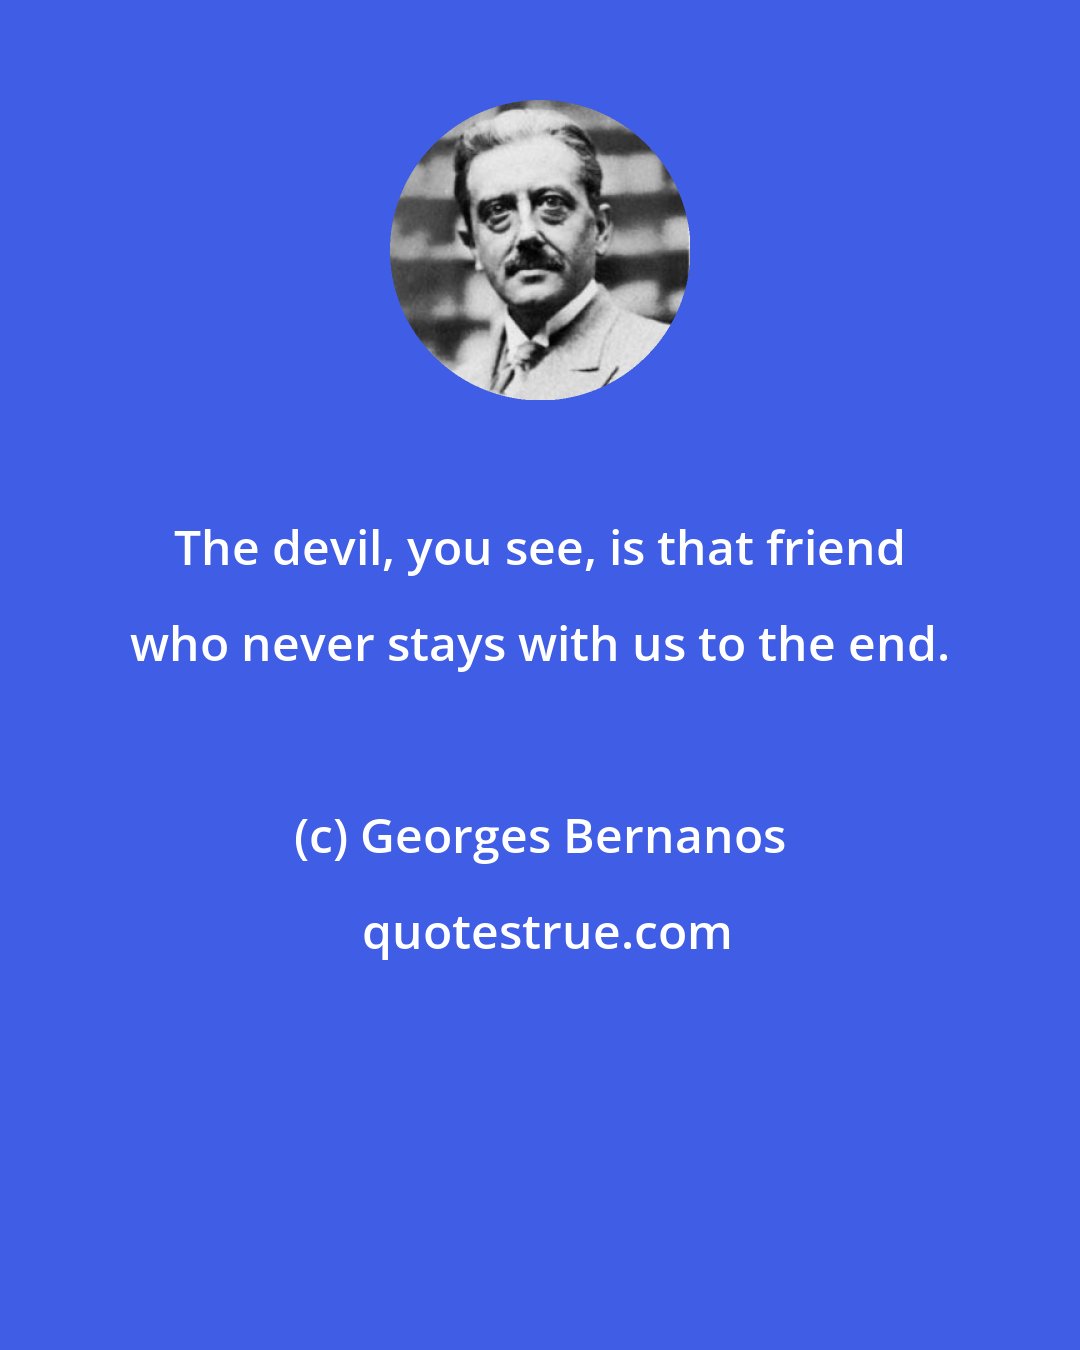 Georges Bernanos: The devil, you see, is that friend who never stays with us to the end.